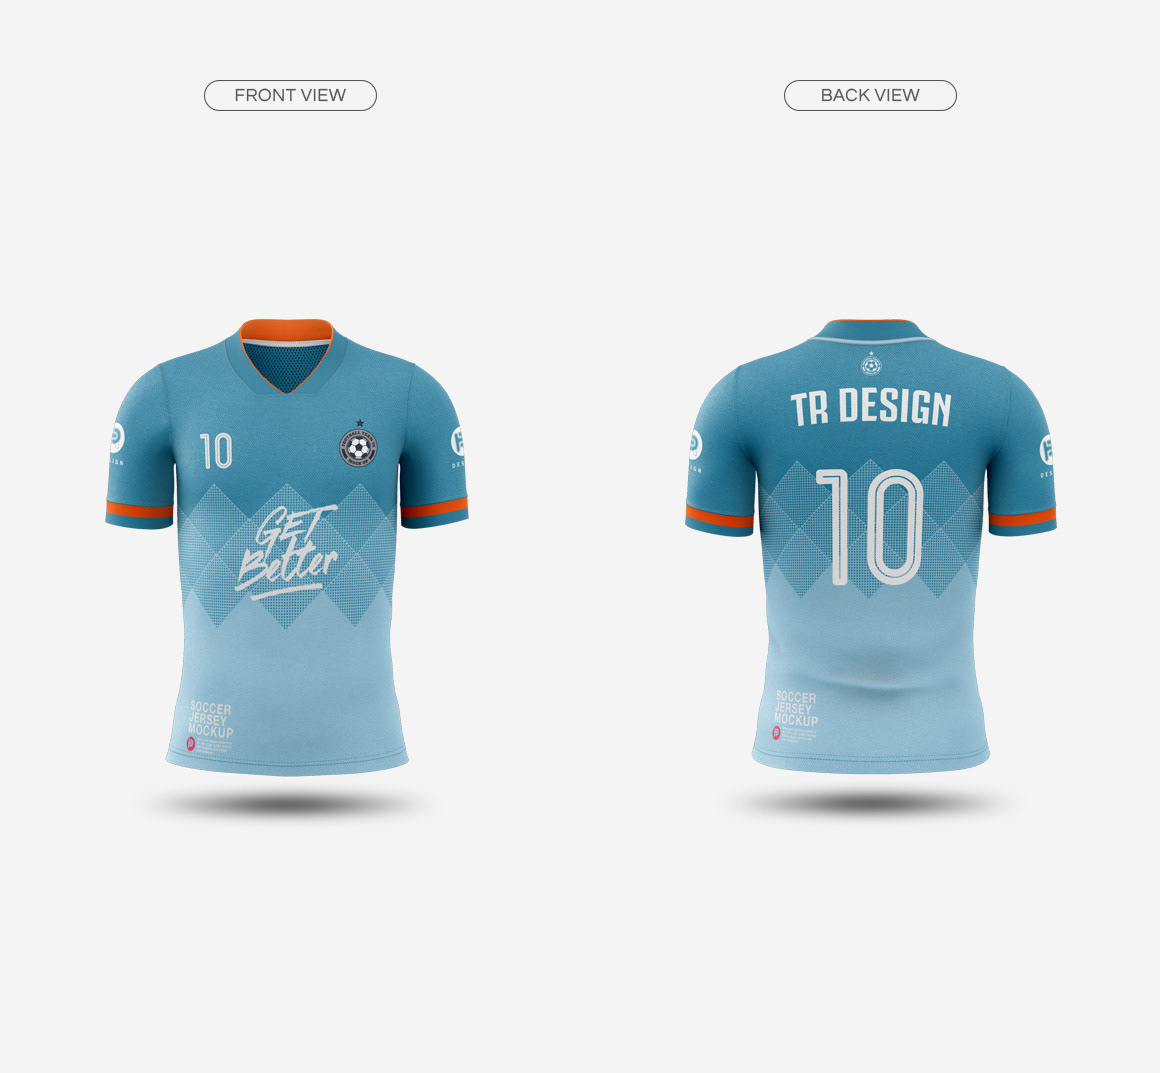 36+ Mockup Jersey 2019 PSD - Free PSD Mockups Smart Object and Templates to create Magazines ...